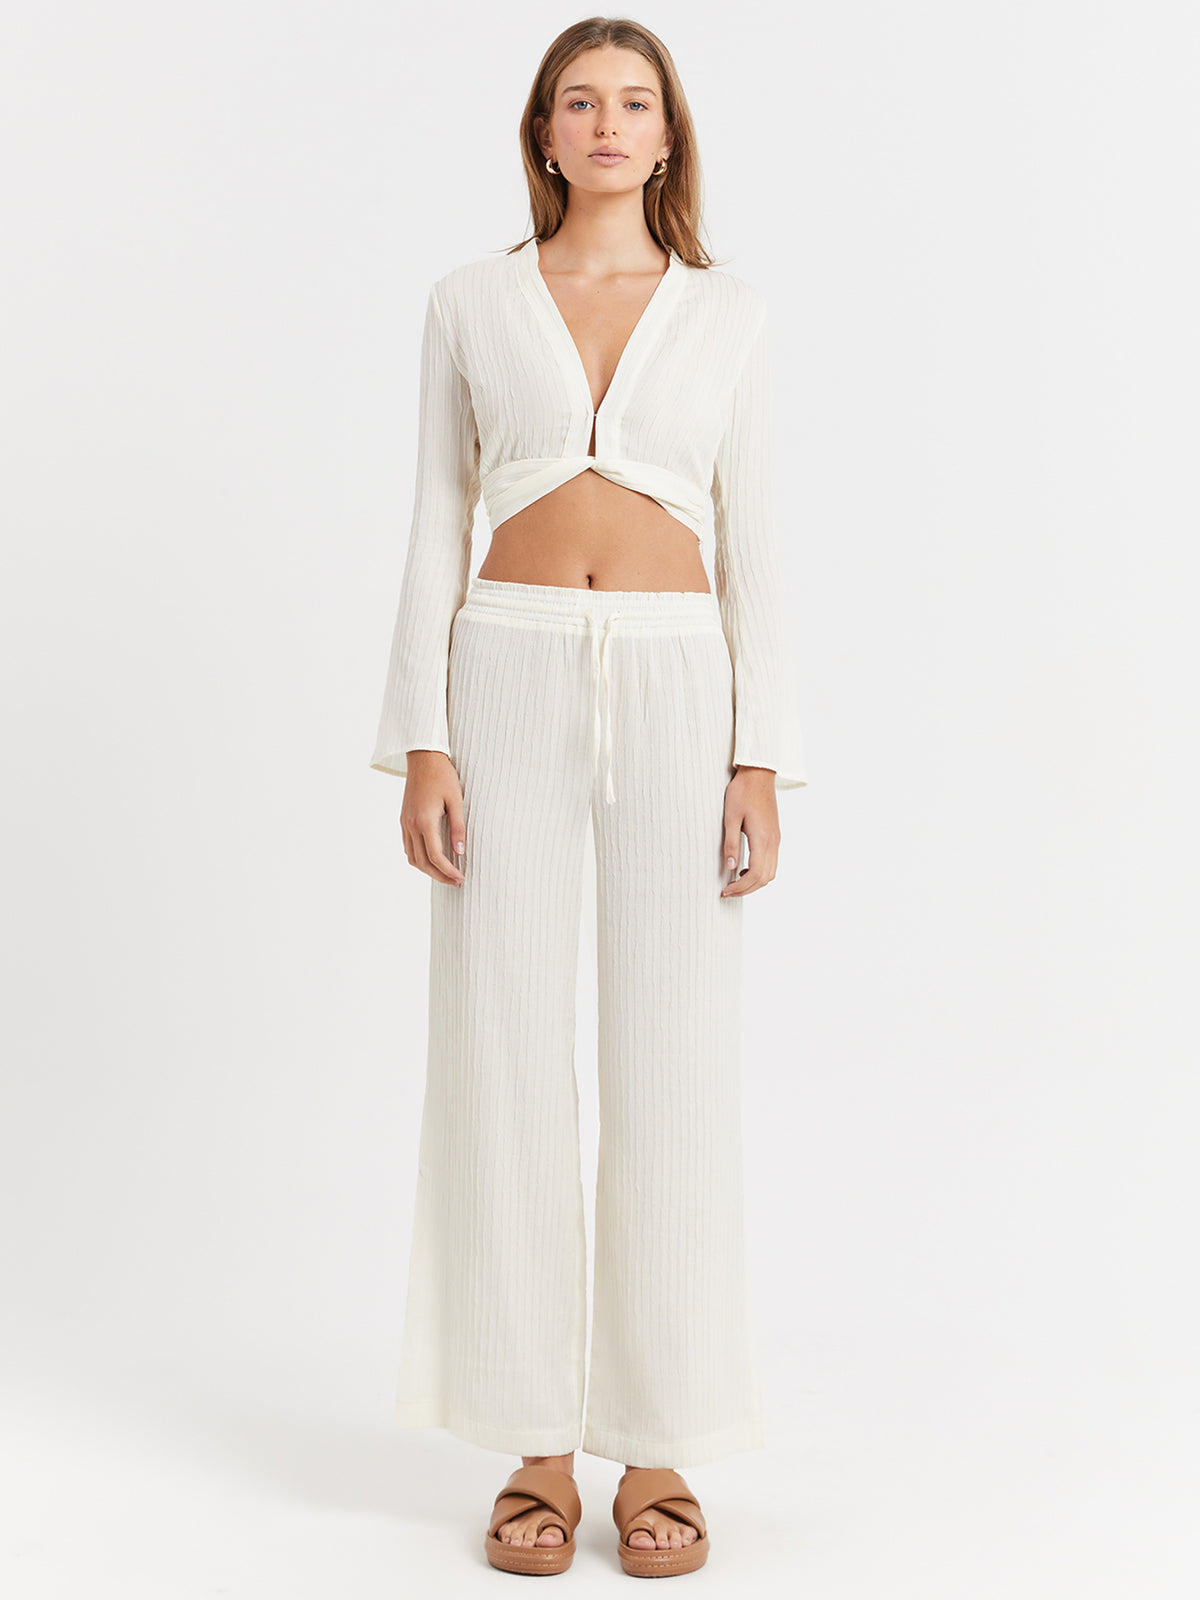 Sorcha Drawstring Pants in Off White